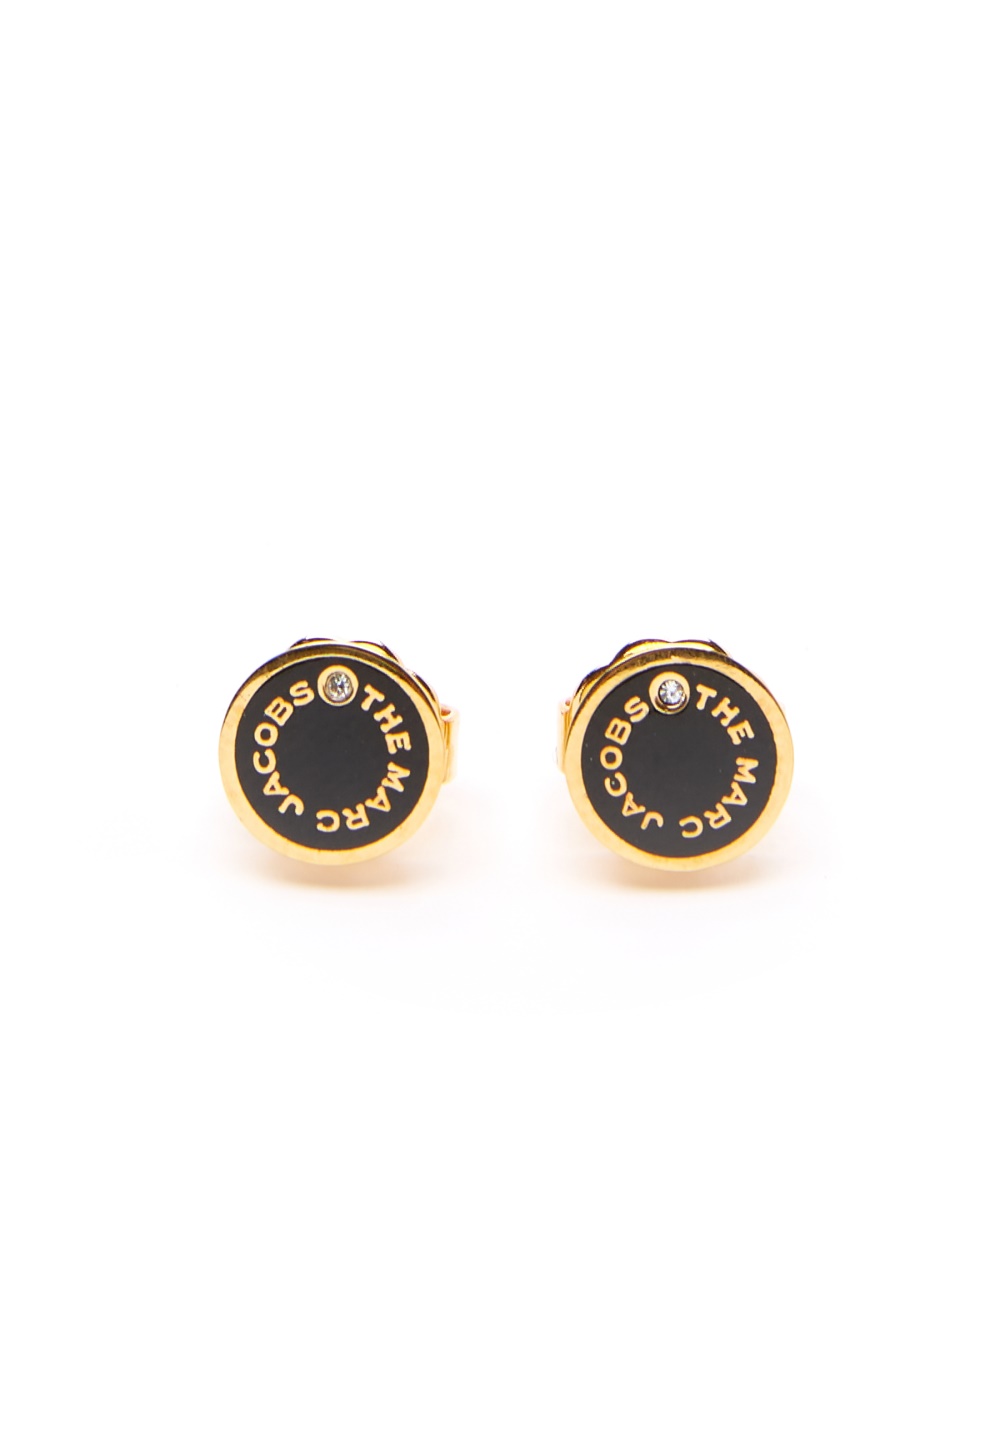 Marc Jacobs (THE) The Medallion Studs Earrings 001 Black/Gold - Bubbleroom